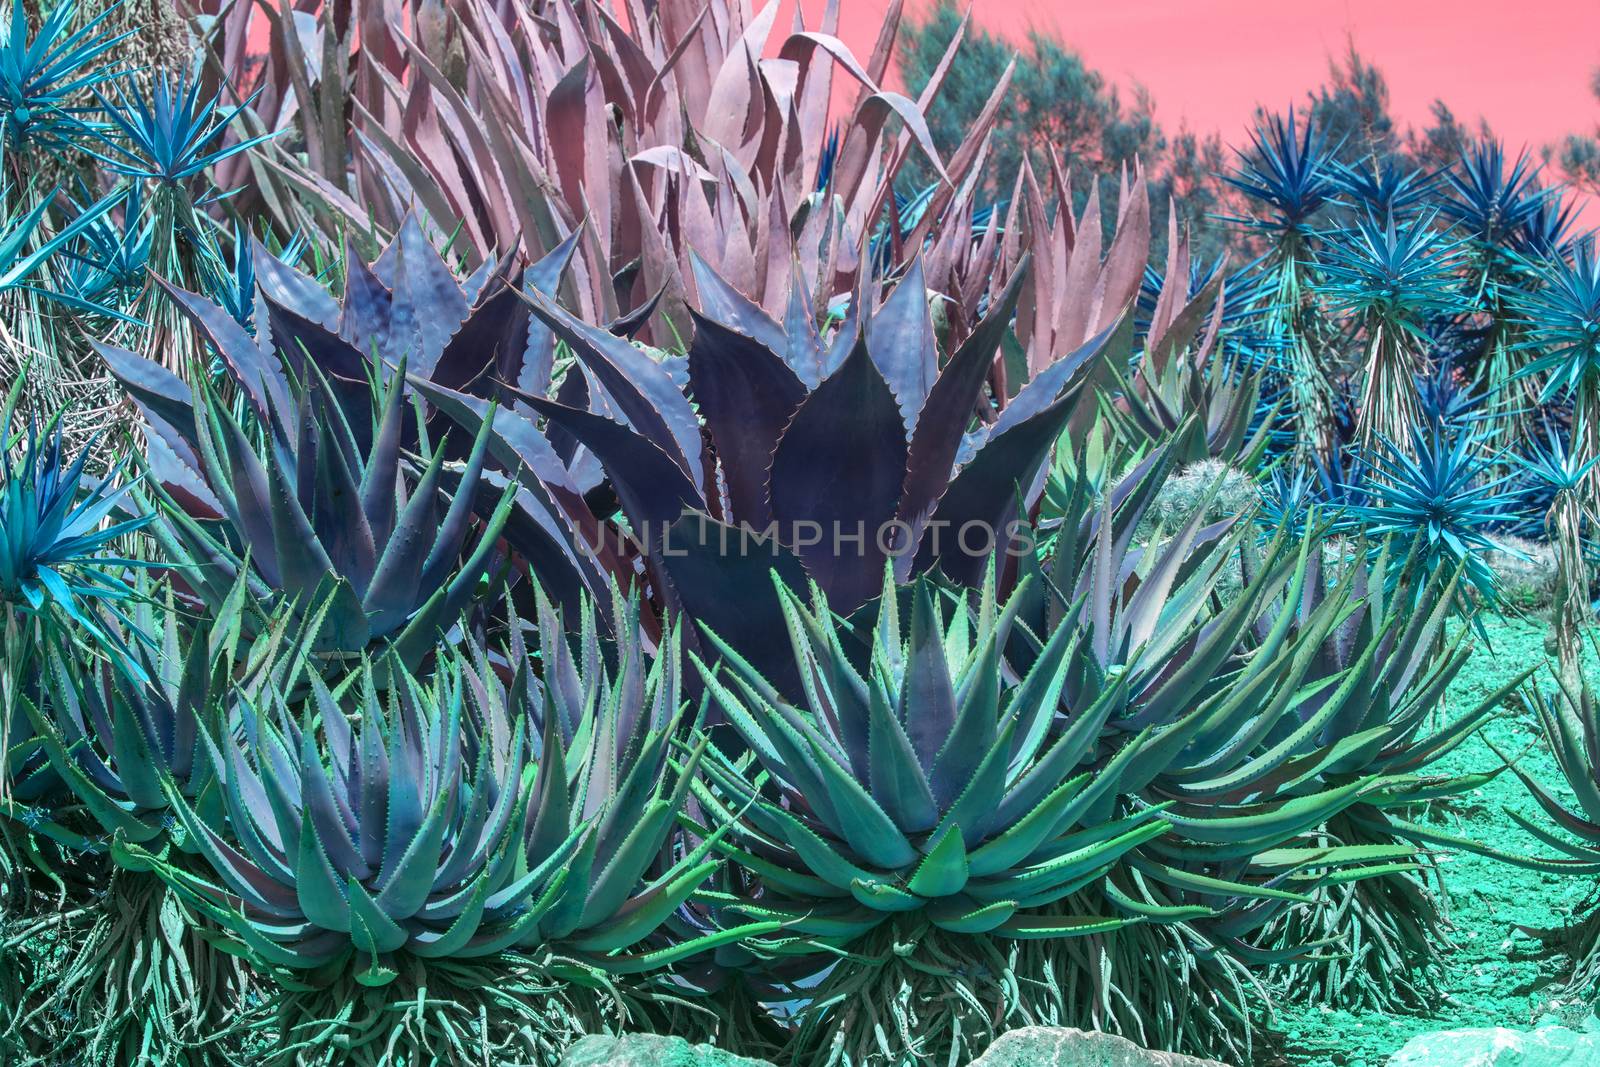 Succulent agave and aloe vera plants pink orange sky by ArtesiaWells